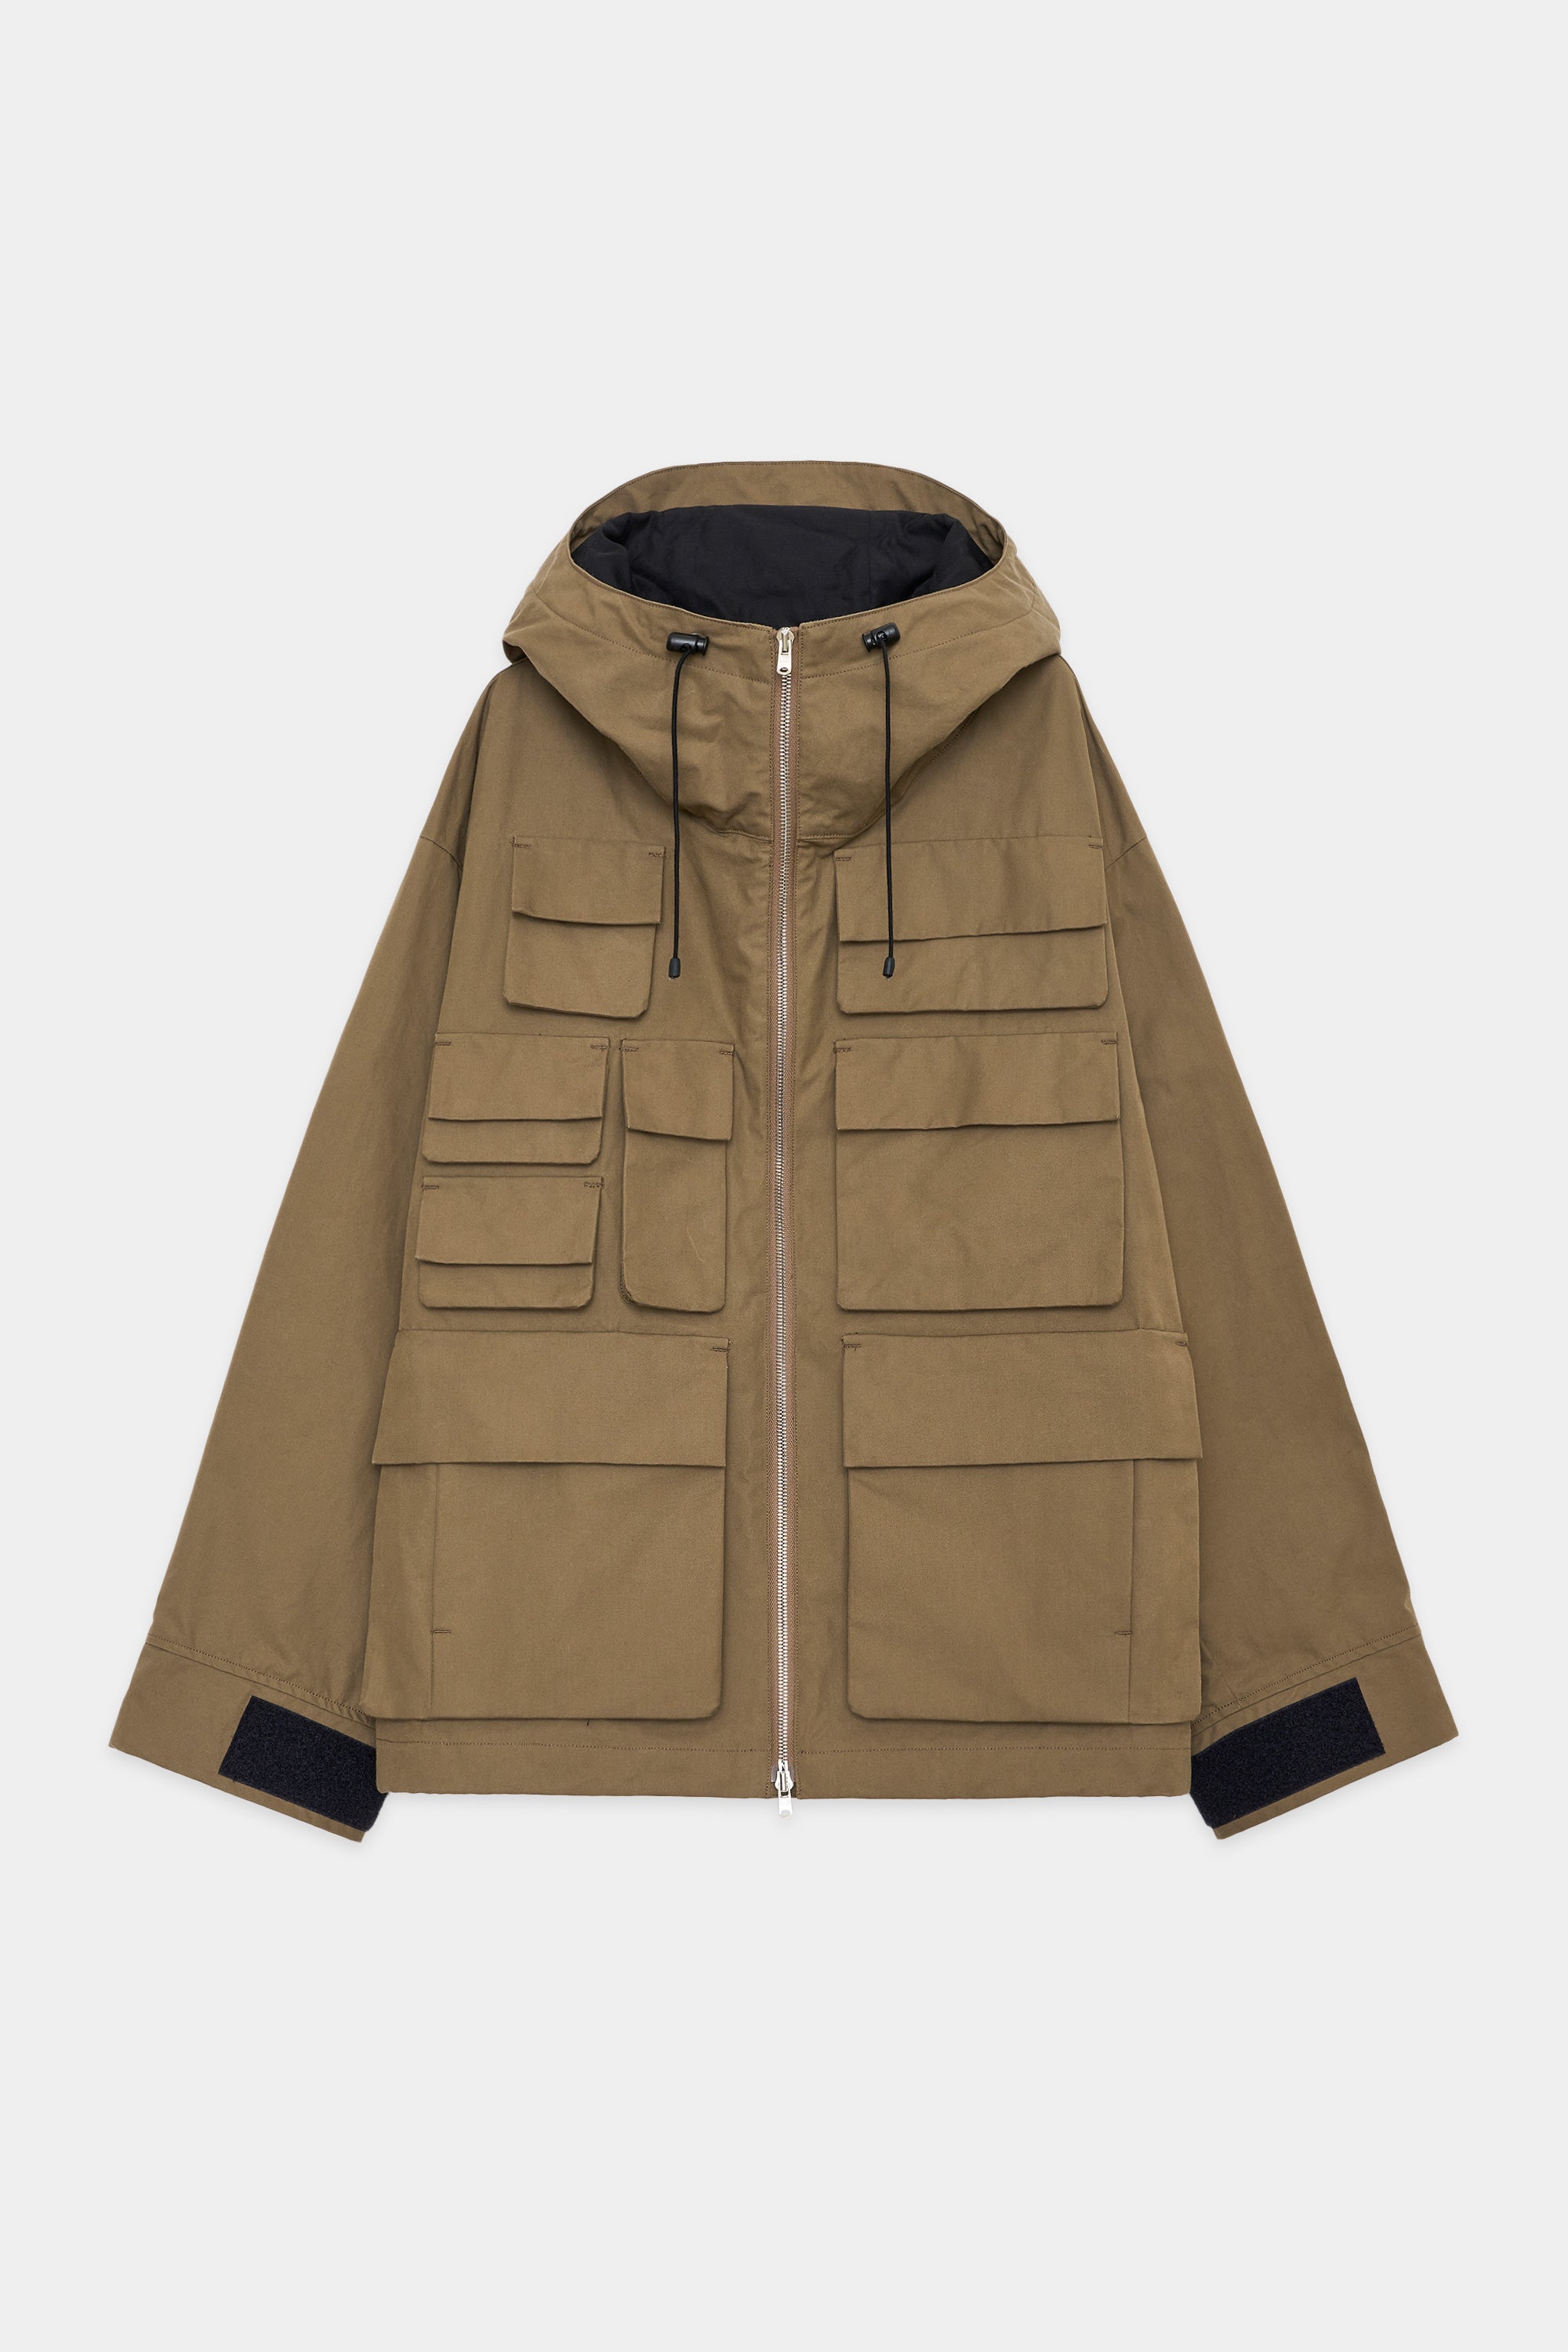 HEAVY ALL WEATHER CLOTH CARRY ALL JACKET, Coyote